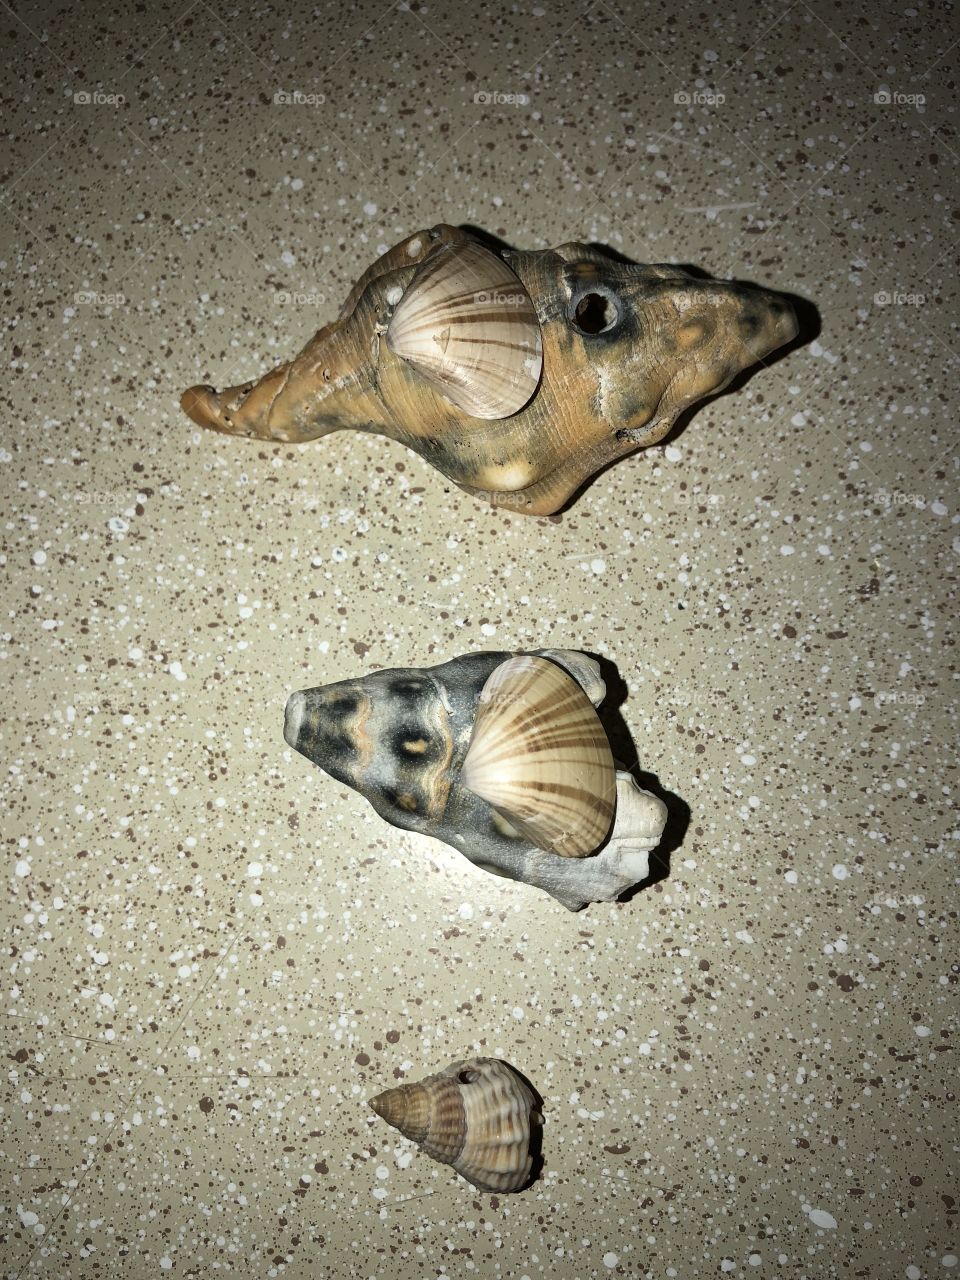 Shells. Shapes sizes and colors fascinating what you can find on a walk by the beach. 